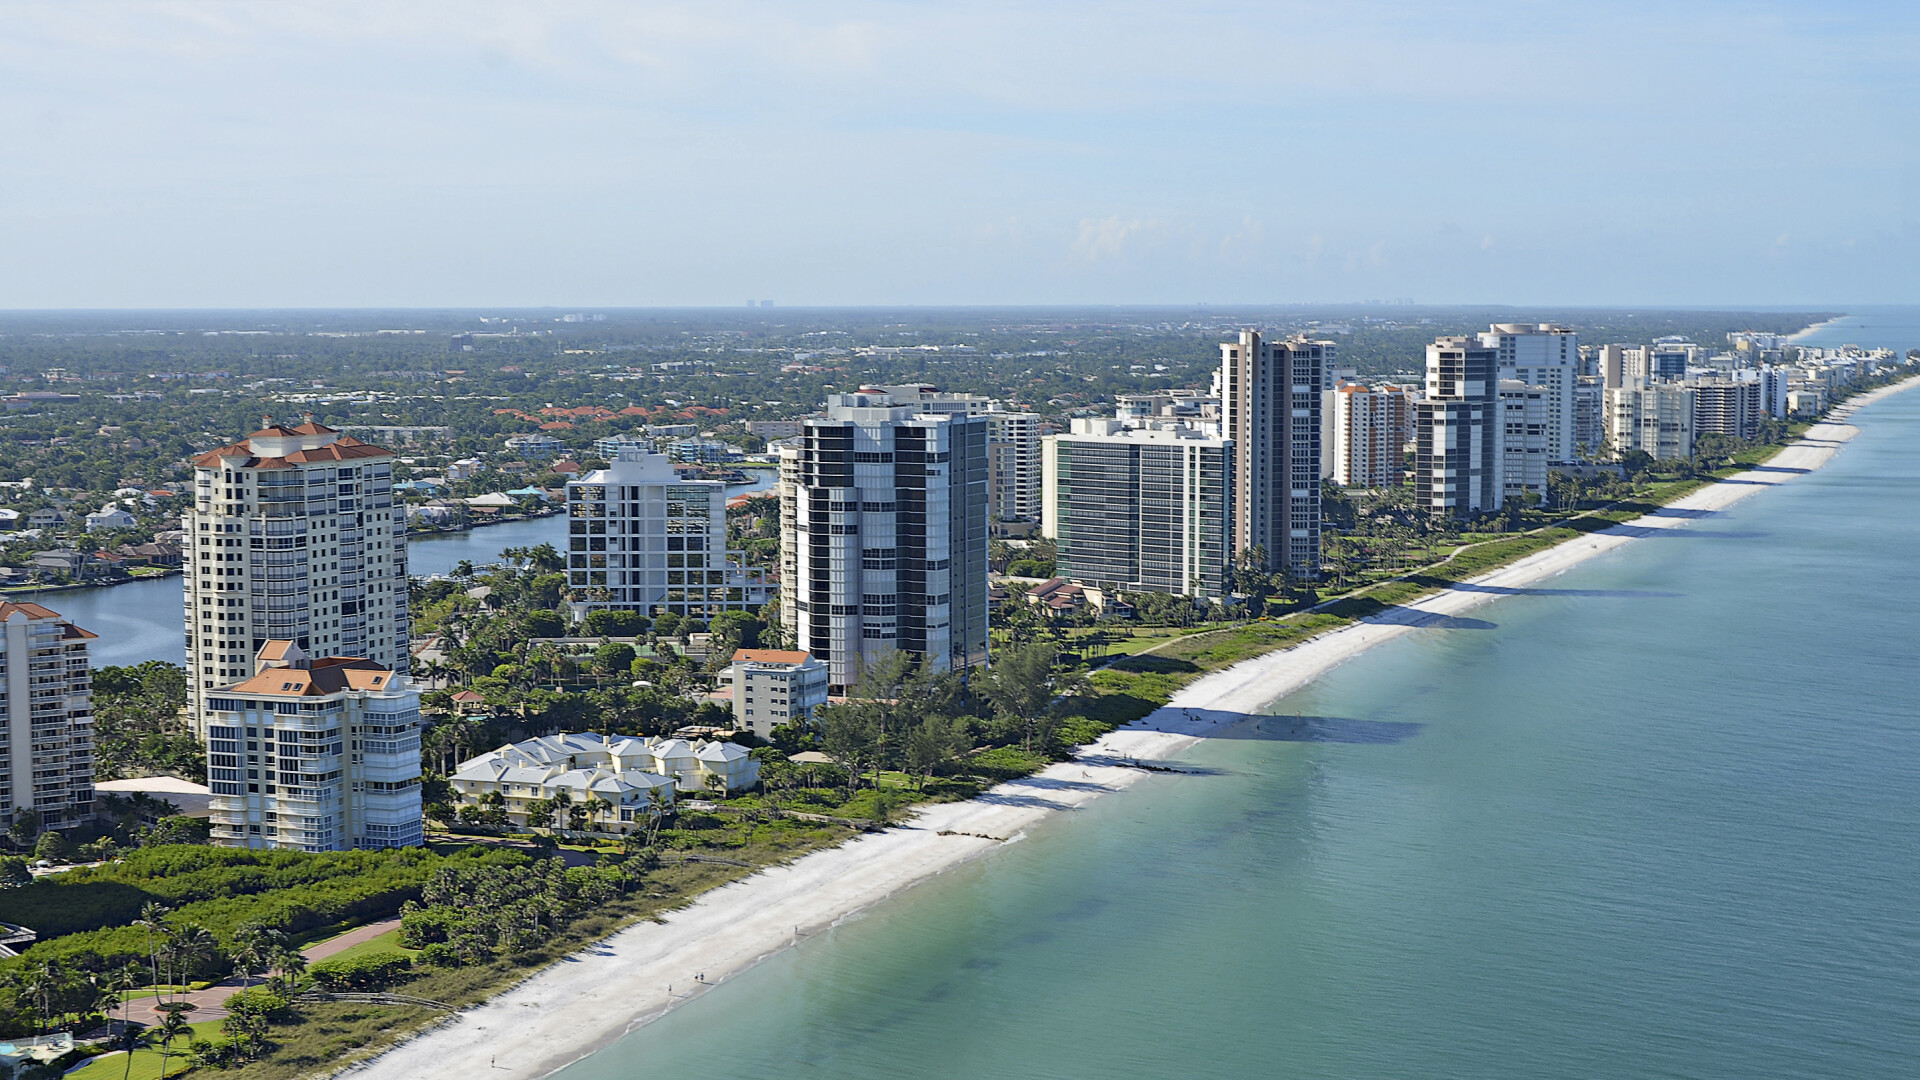 Aerial view of luxury beach condos on the Gulf, Naples FL